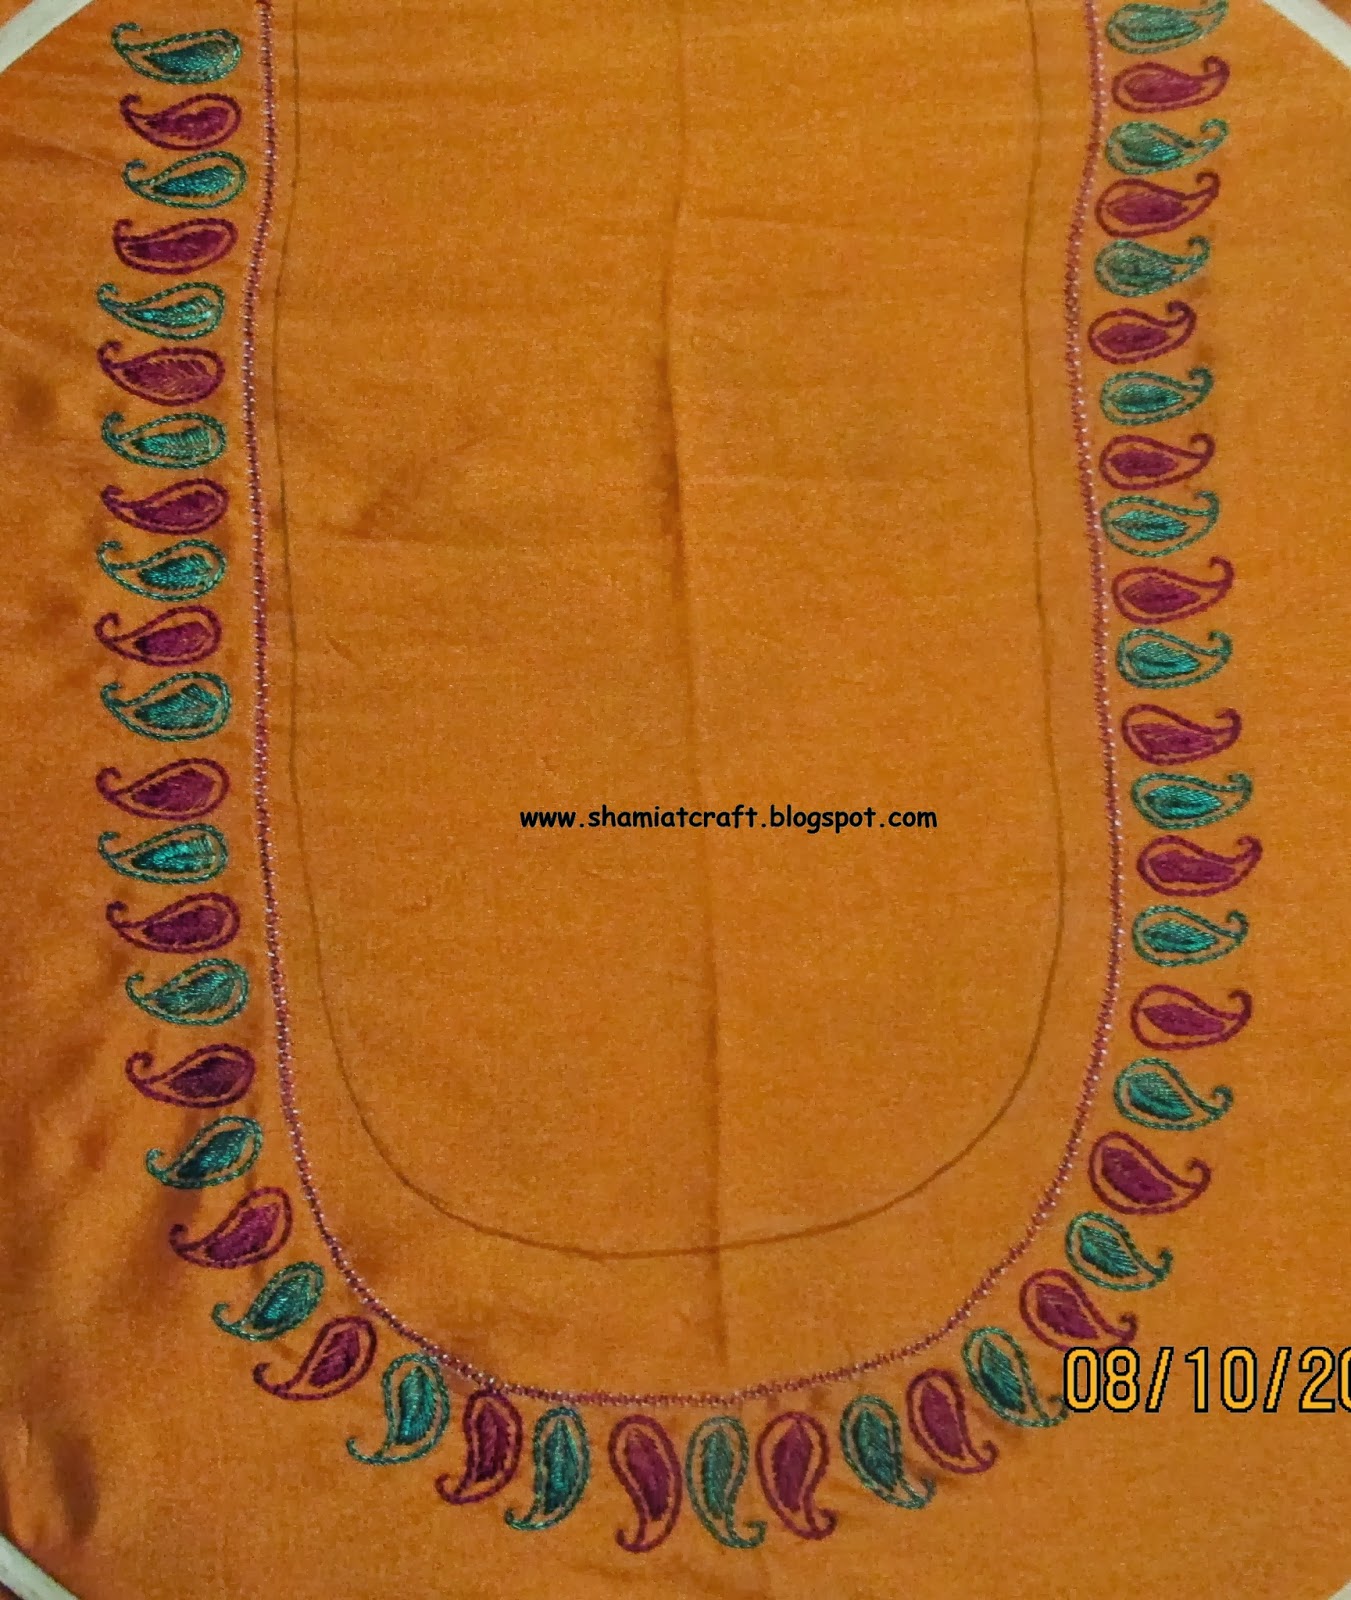 My craft works: Embroidered blouse - Chain stitch